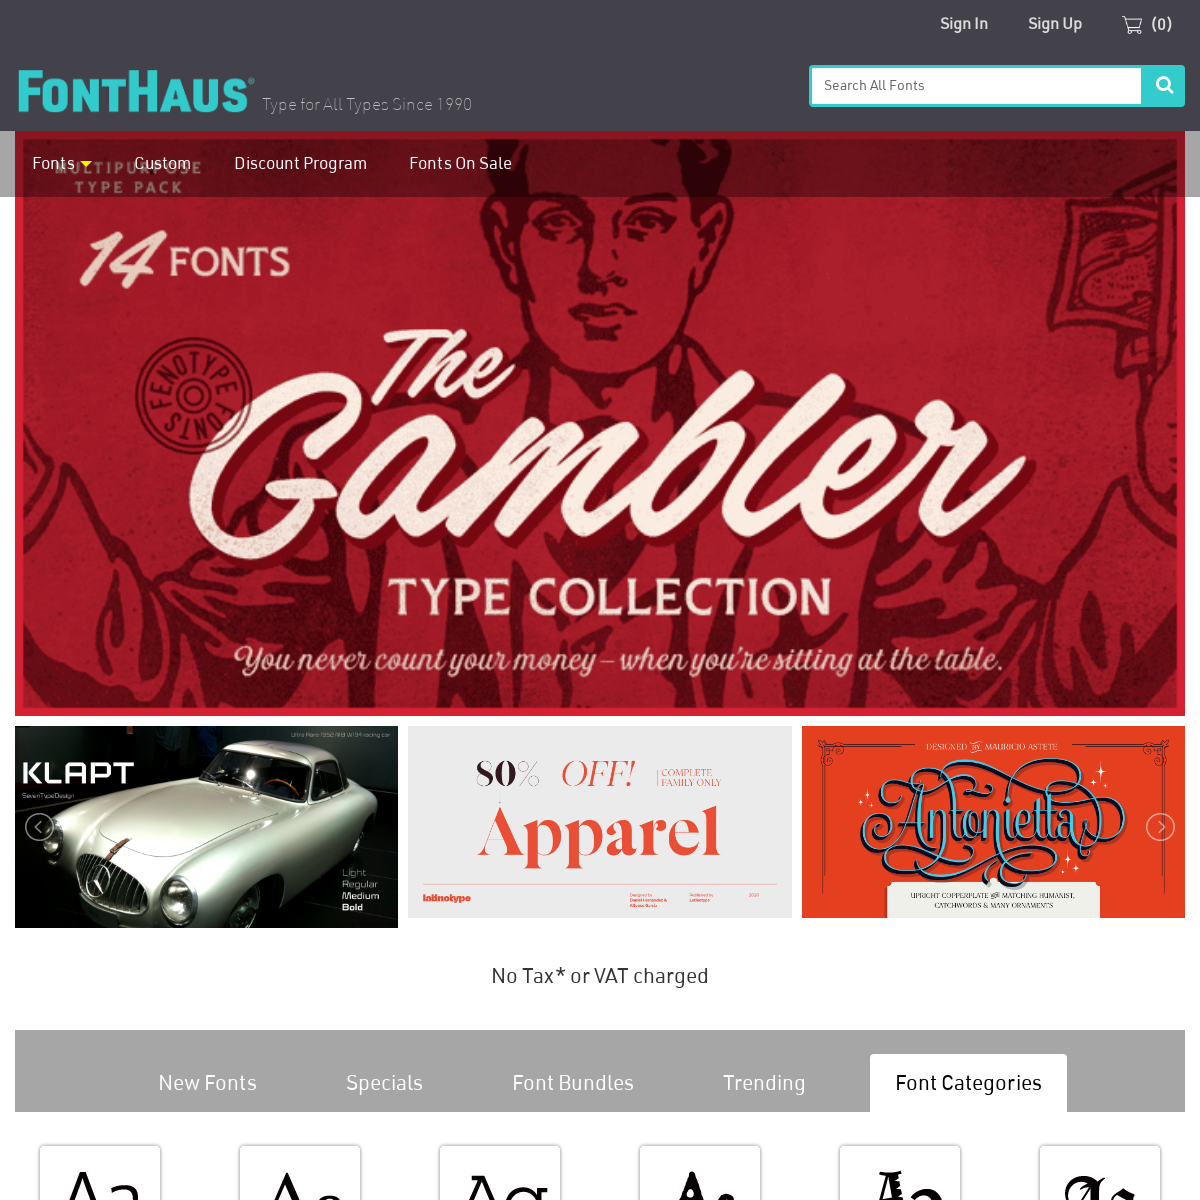 A complete backup of fonthaus.com